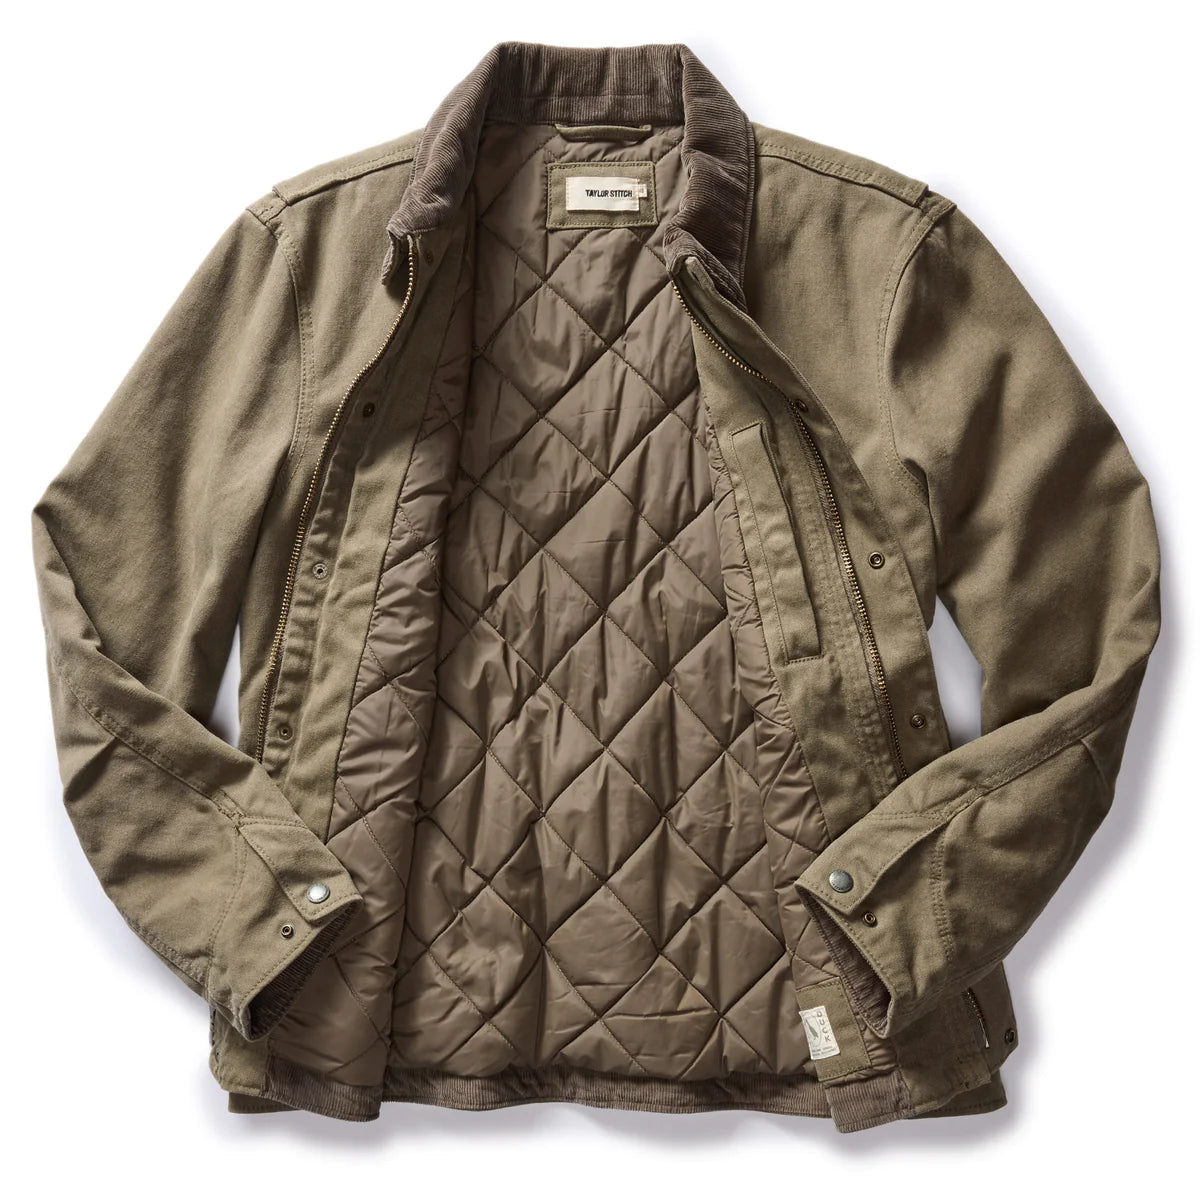 Taylor Stitch - The Workhorse Jacket - Clothing at Above Snakes